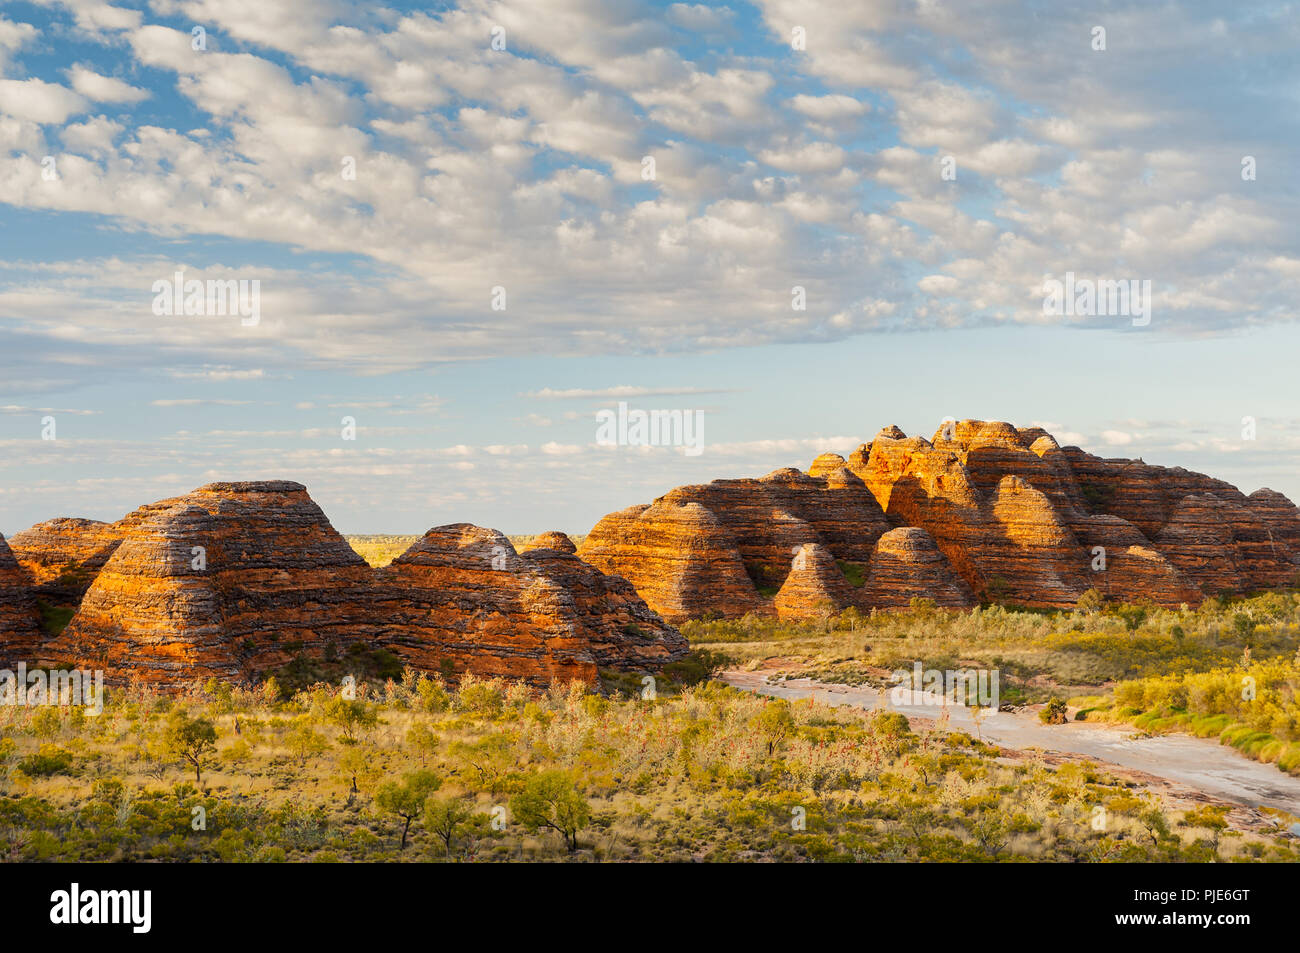 Famous Beehive Domes of Purnululu National Park. Stock Photo